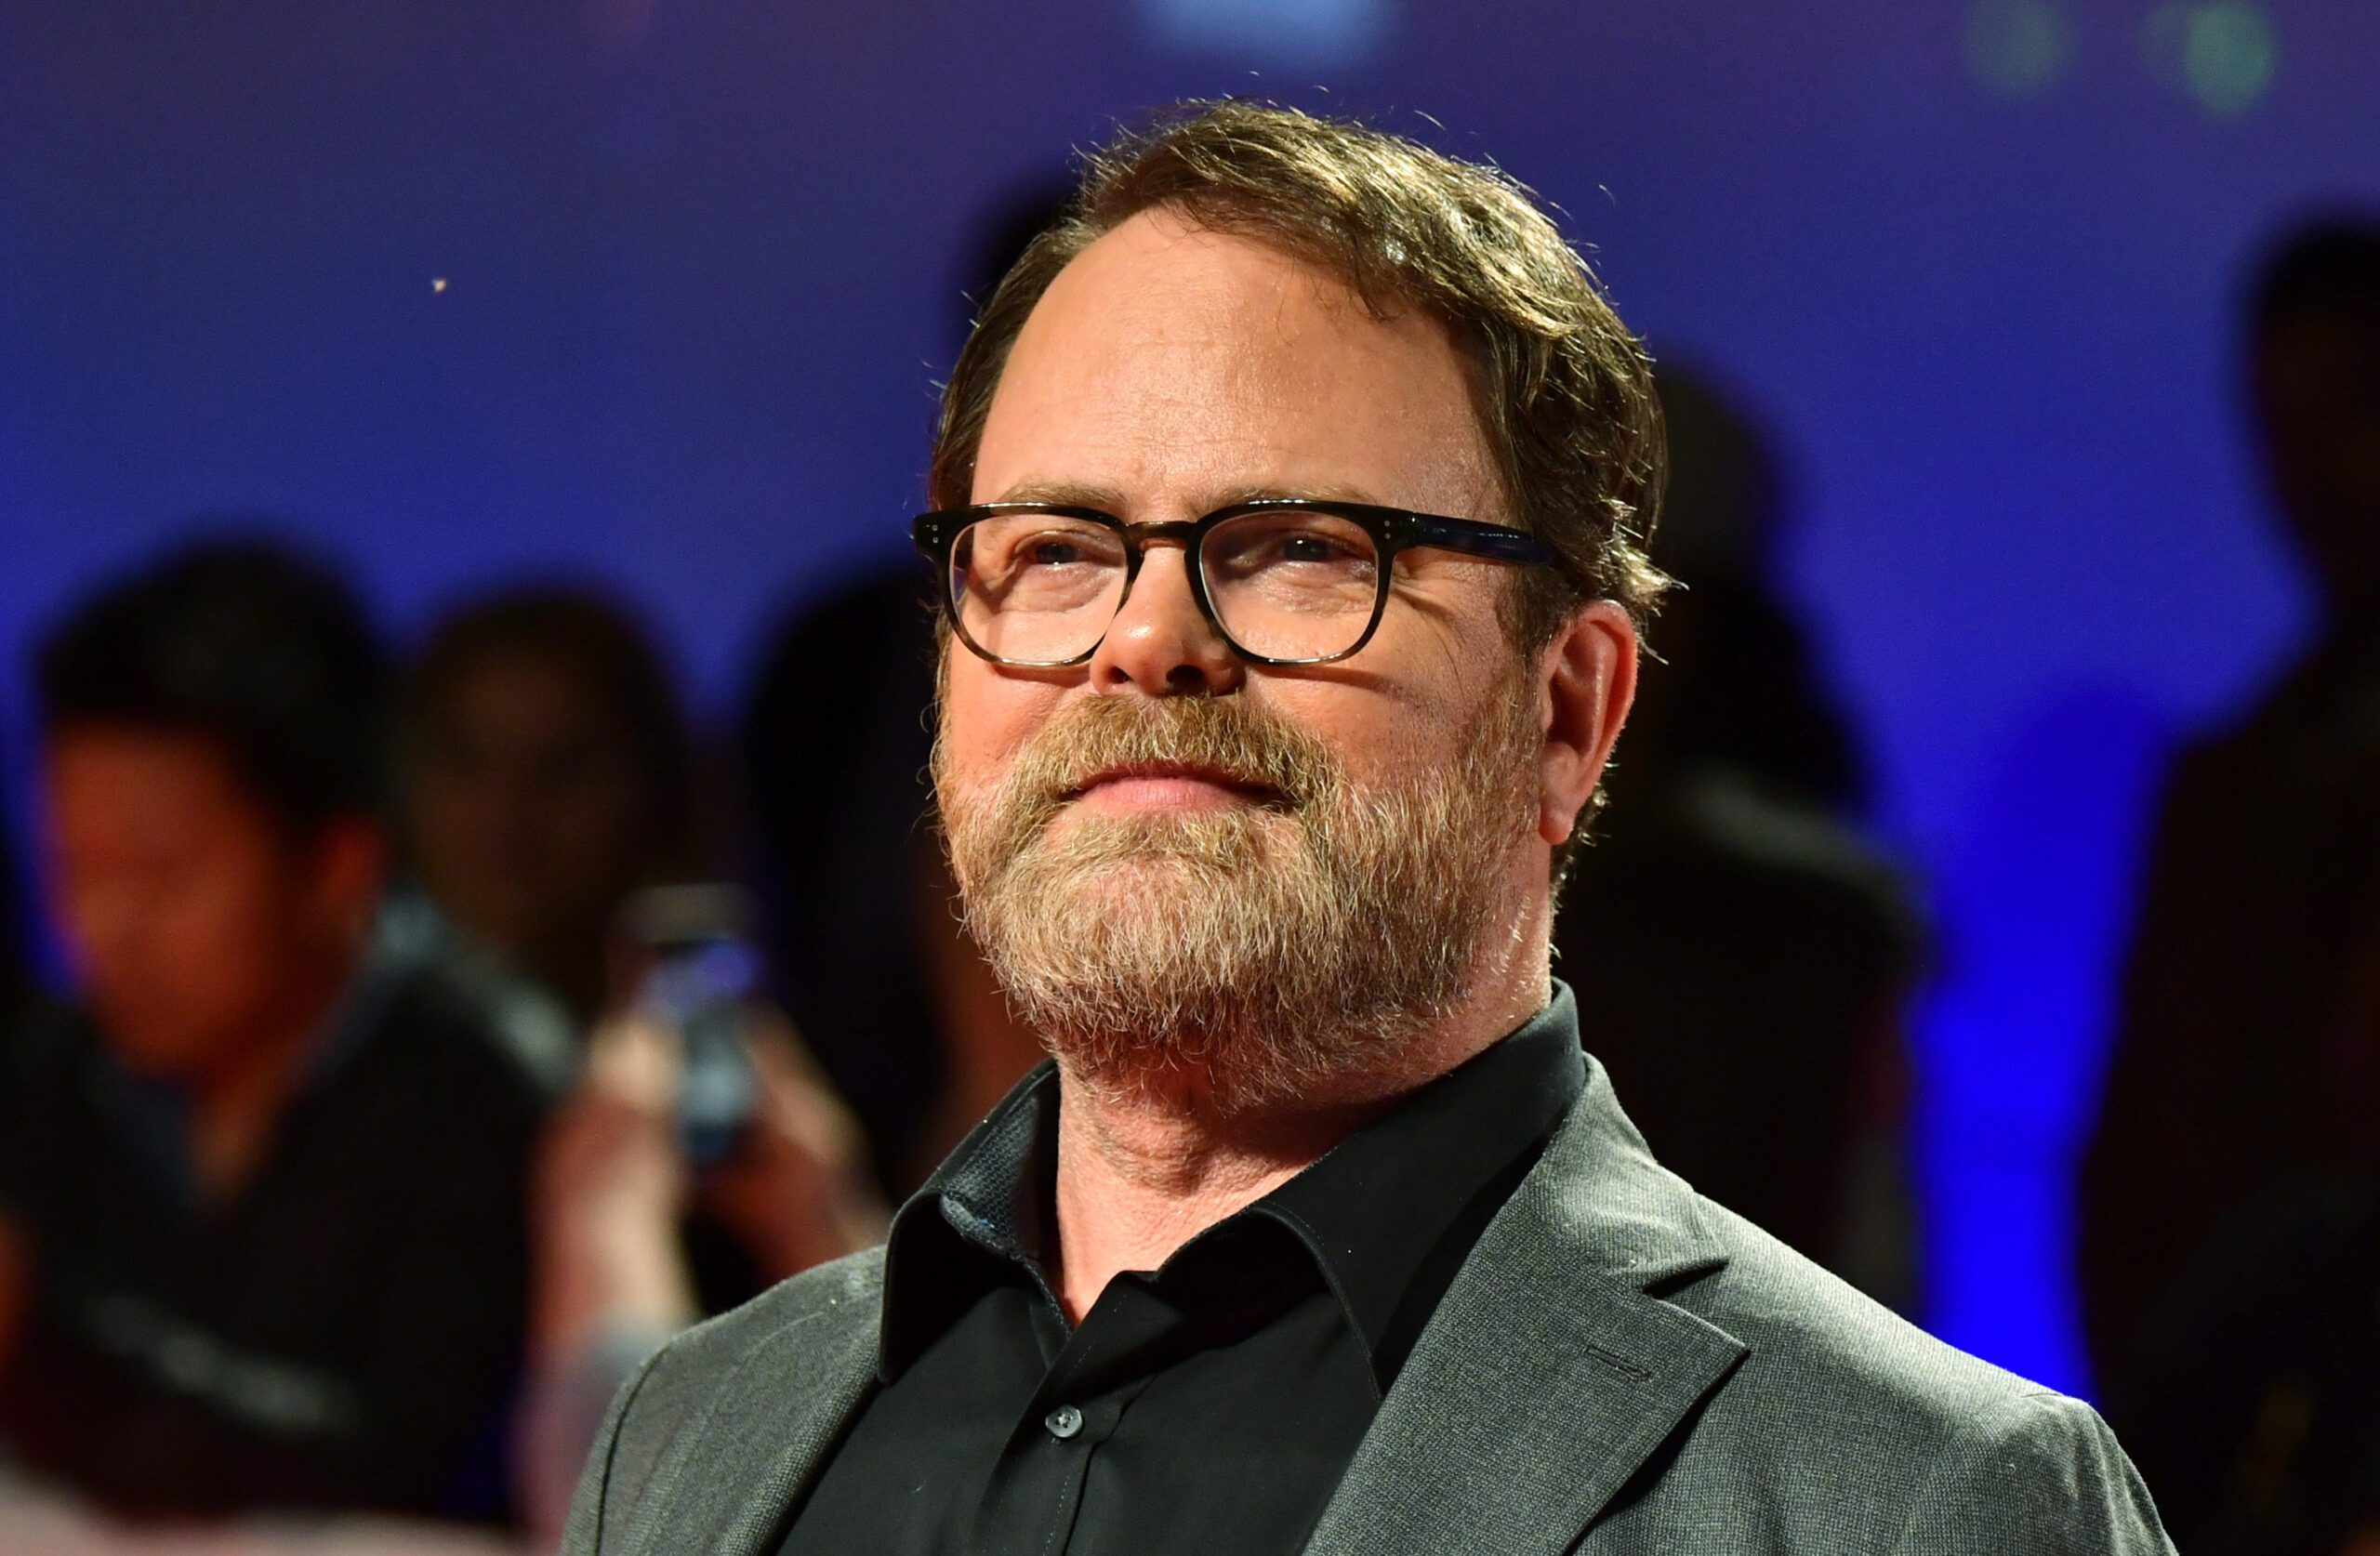 ‘the-office’-actor-rainn-wilson-alters-his-name-on-social-media-‘to-help-save-planet-earth’